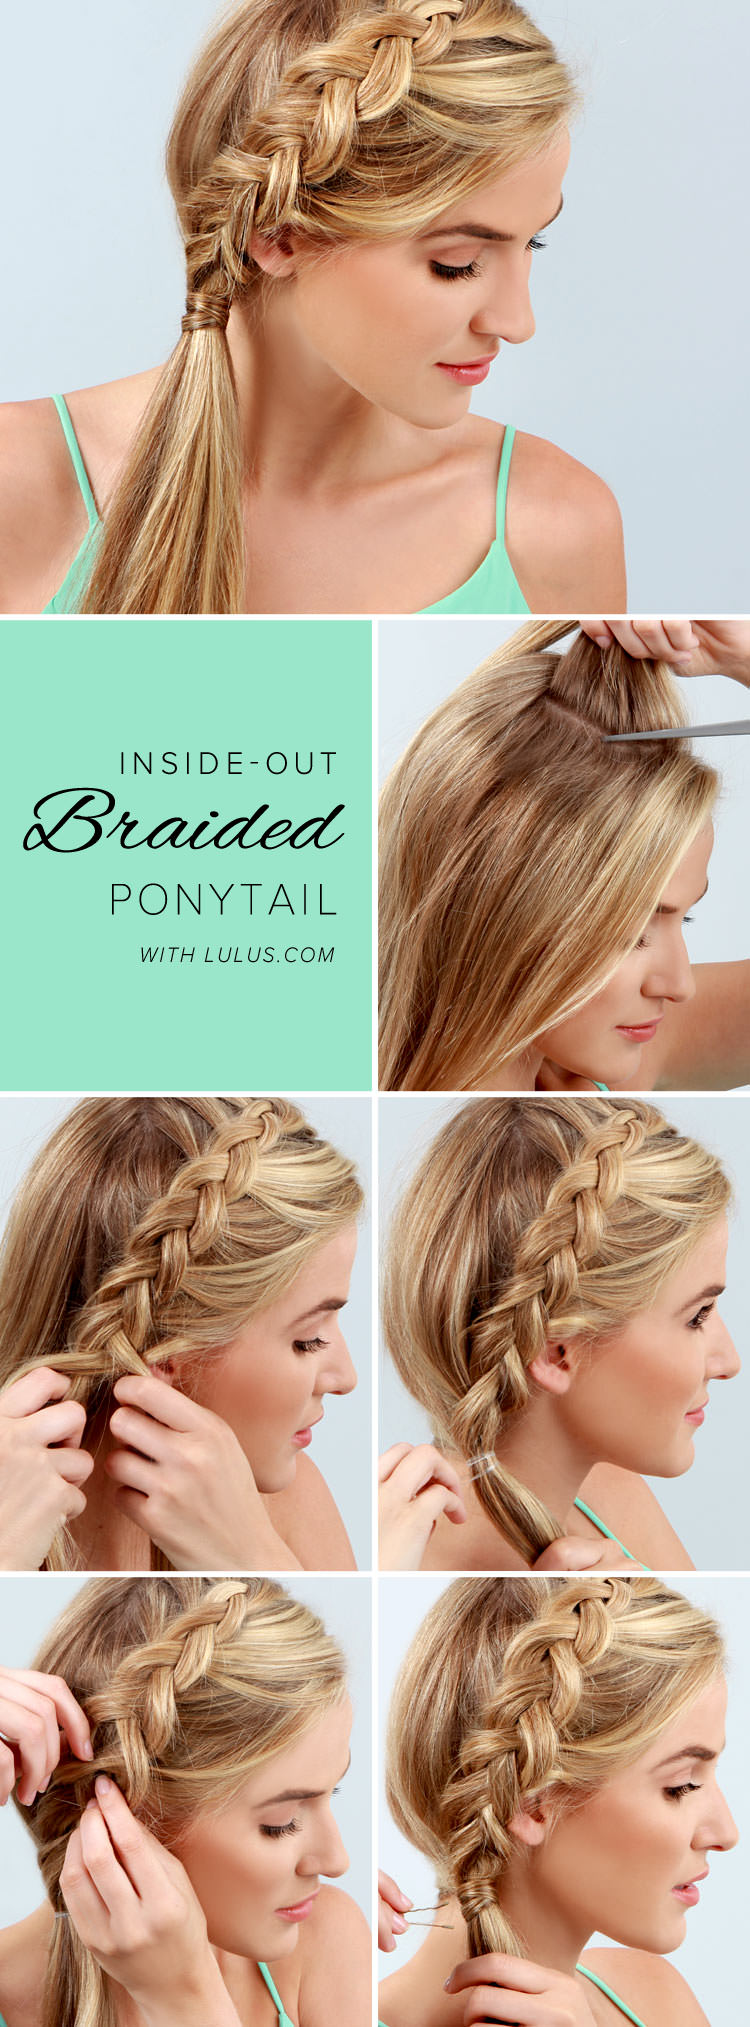 INSIDE OUT BRAIDED PONYTAIL